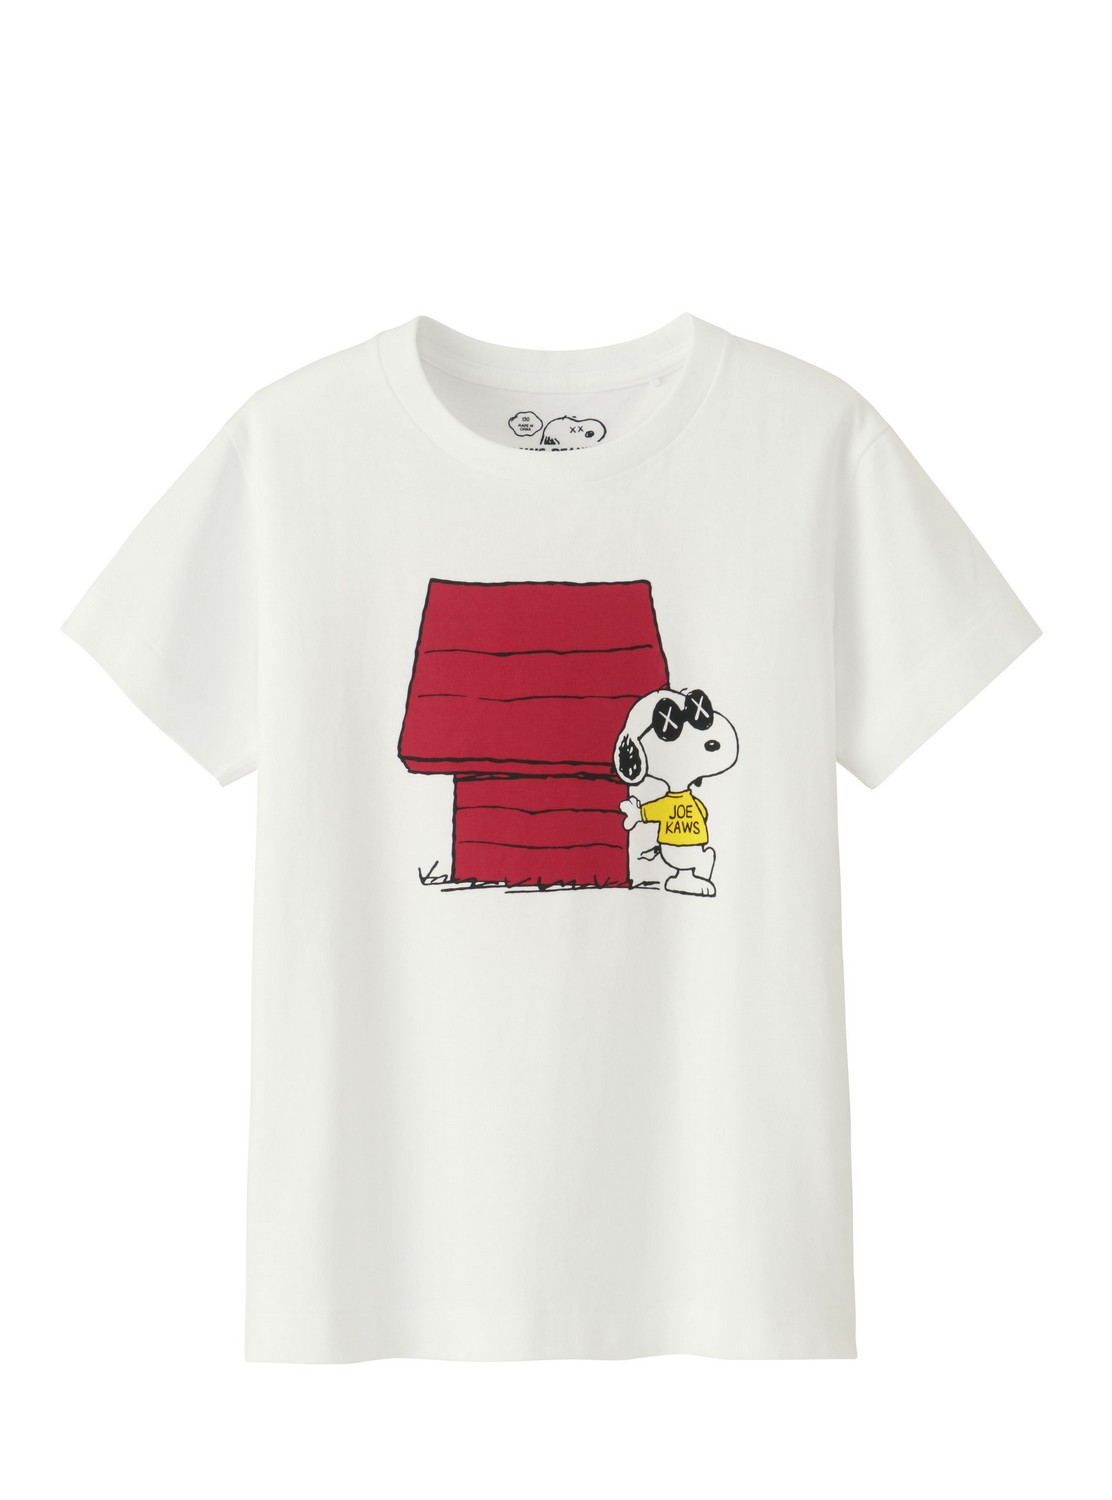 Uniqlo releases all the details on its KAWS and Peanuts ...